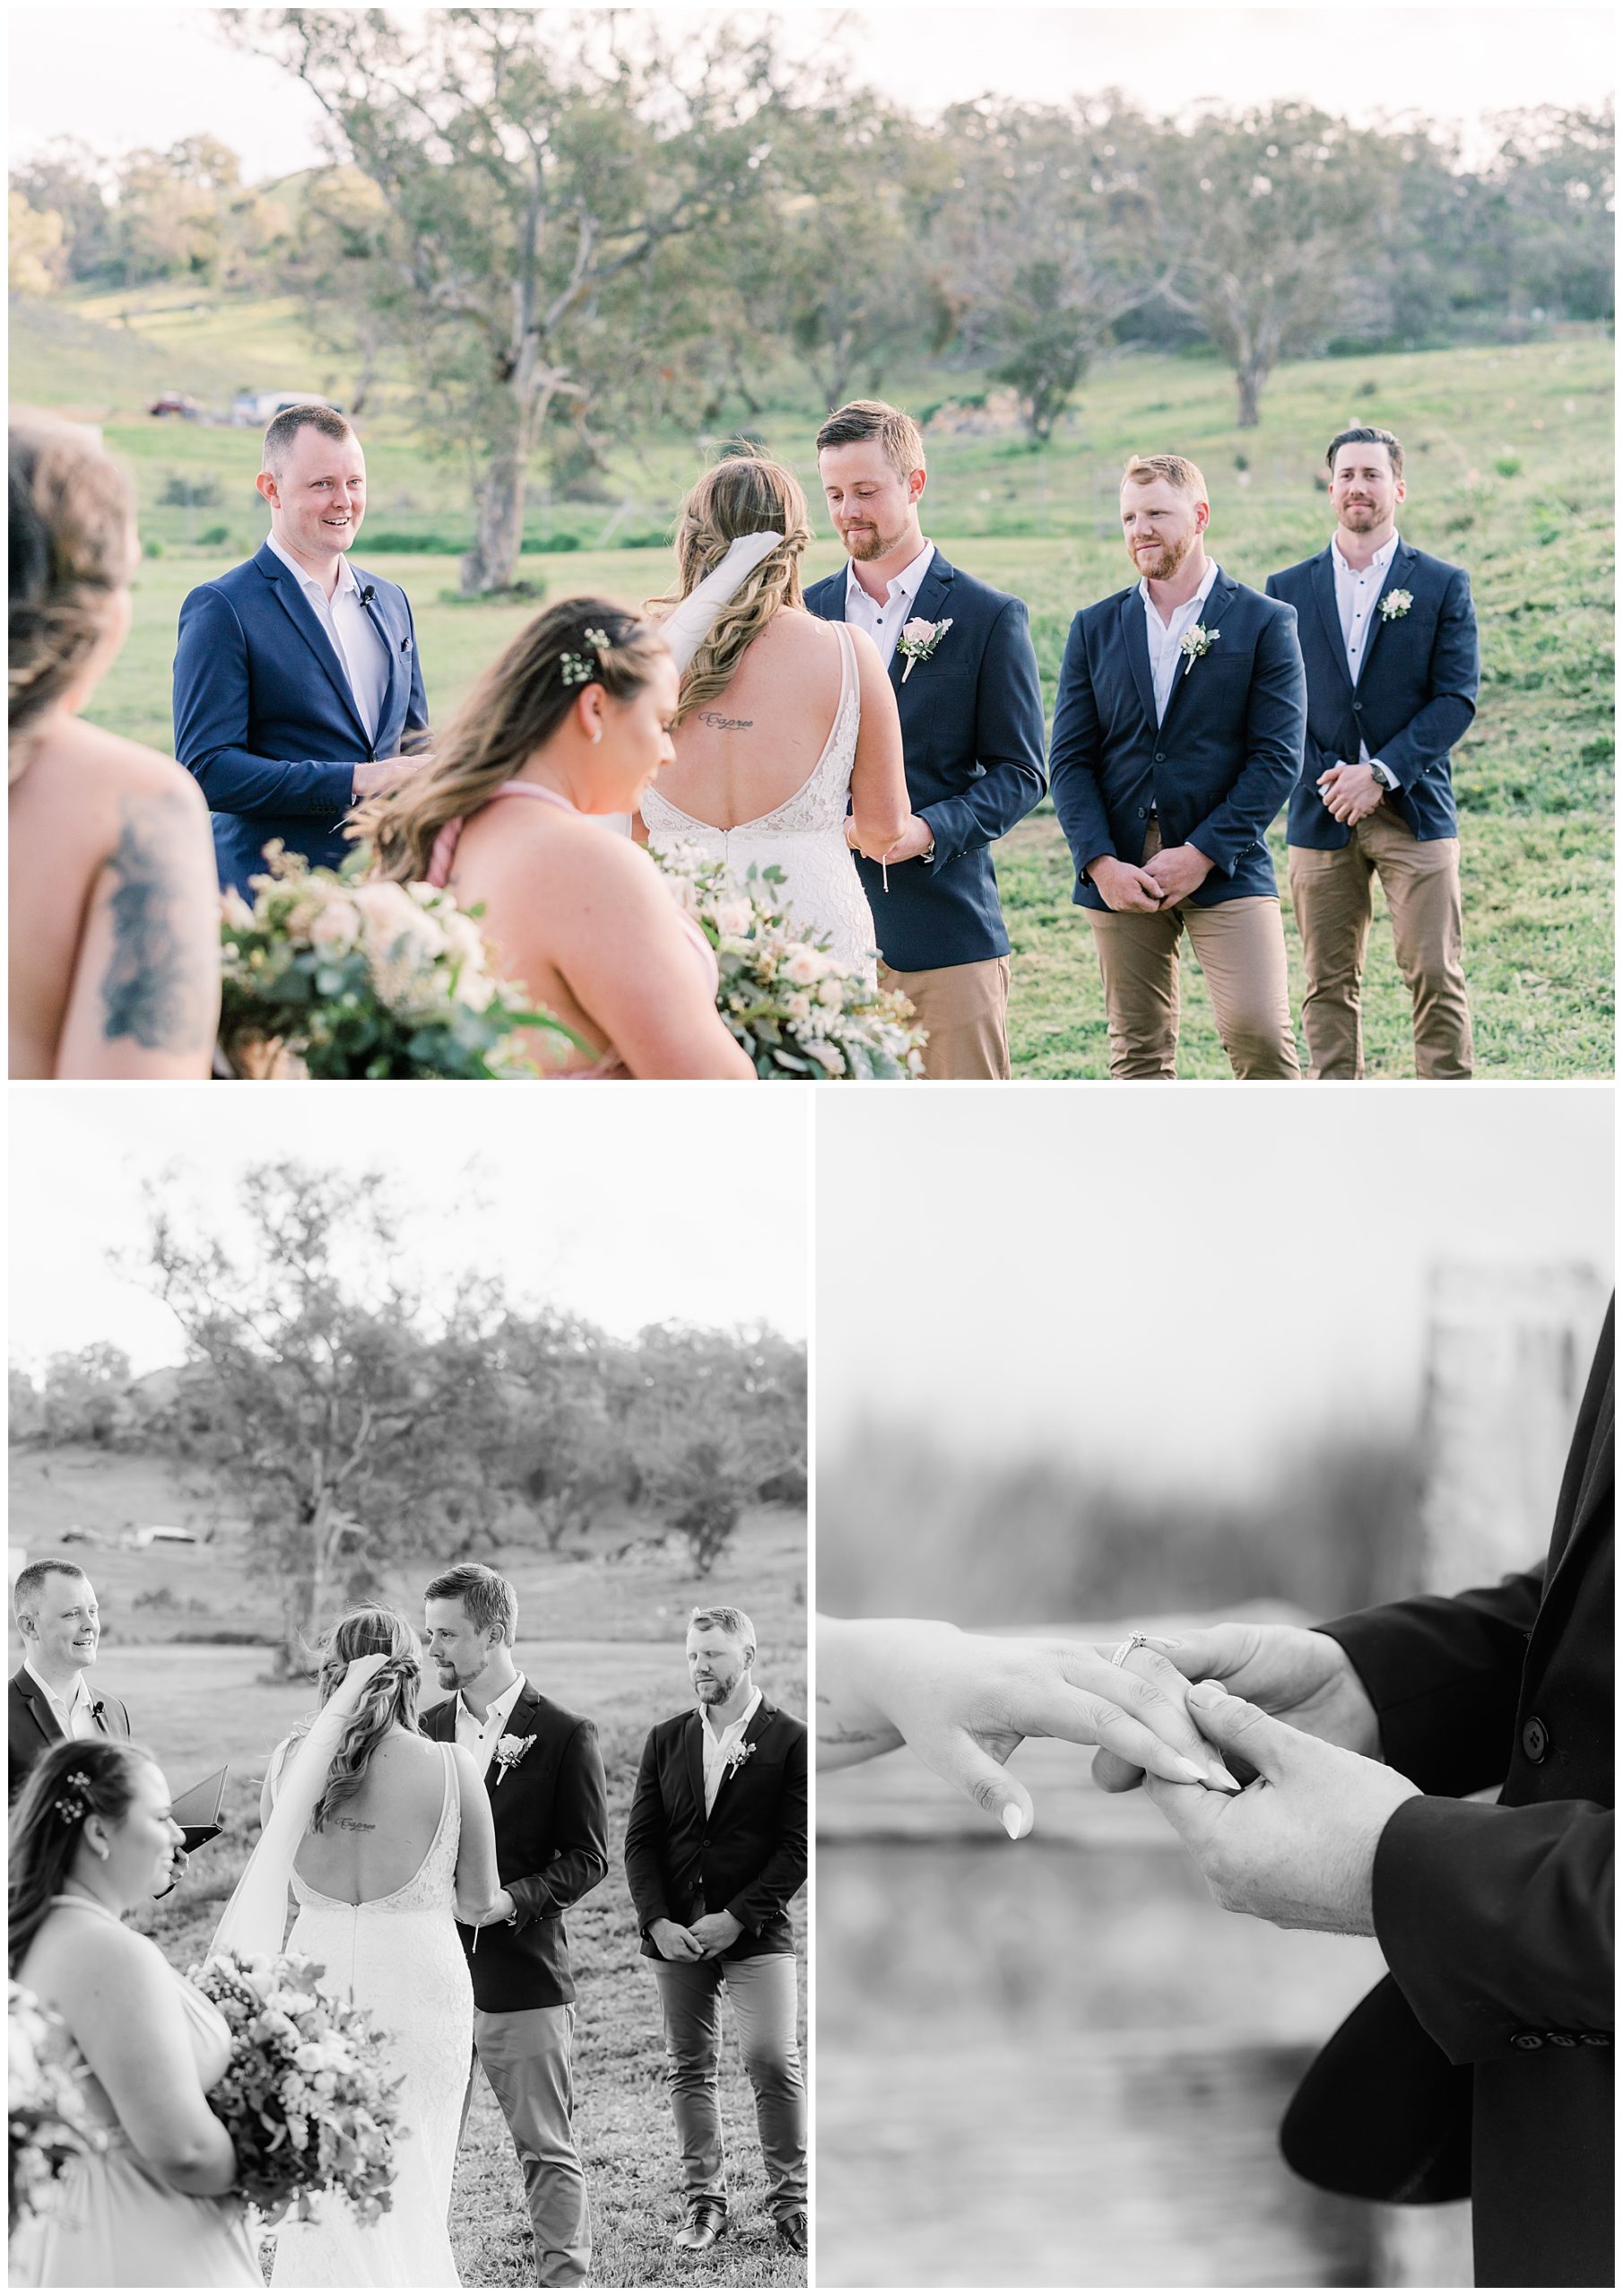 Wedding ceremony locations in Canberra | The truffle farm 